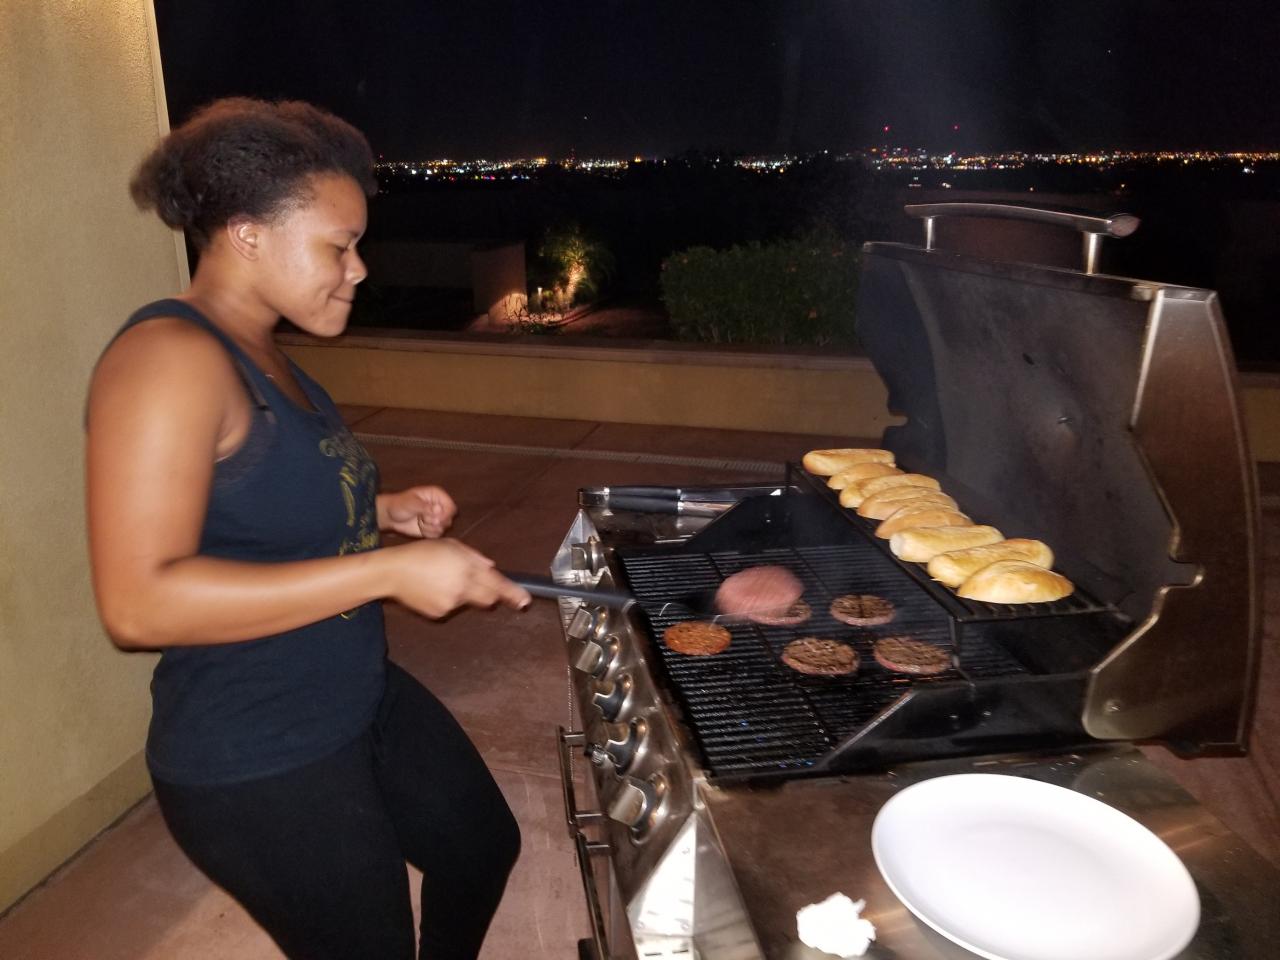 Ashley at the grill